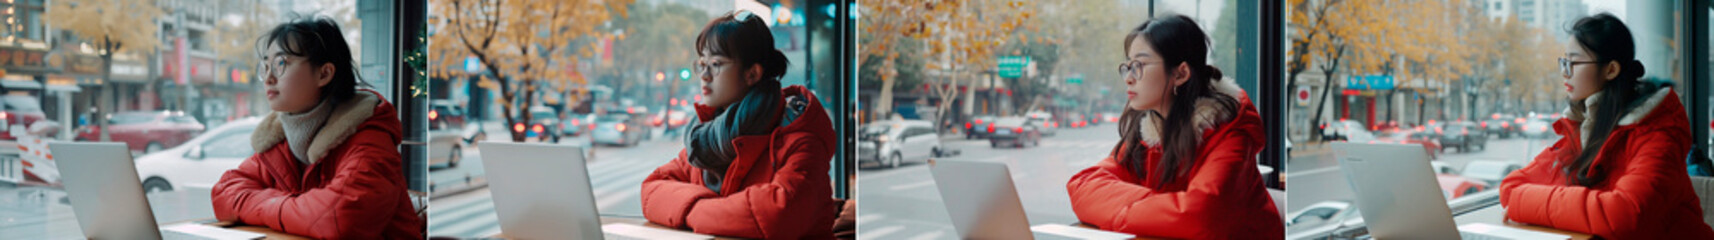 The image shows a Chinese teenager wearing a red autumn jacket and glasses The action takes place in a cafe The work is done in a realistic style The teenager is shown sitting at a table with a laptop